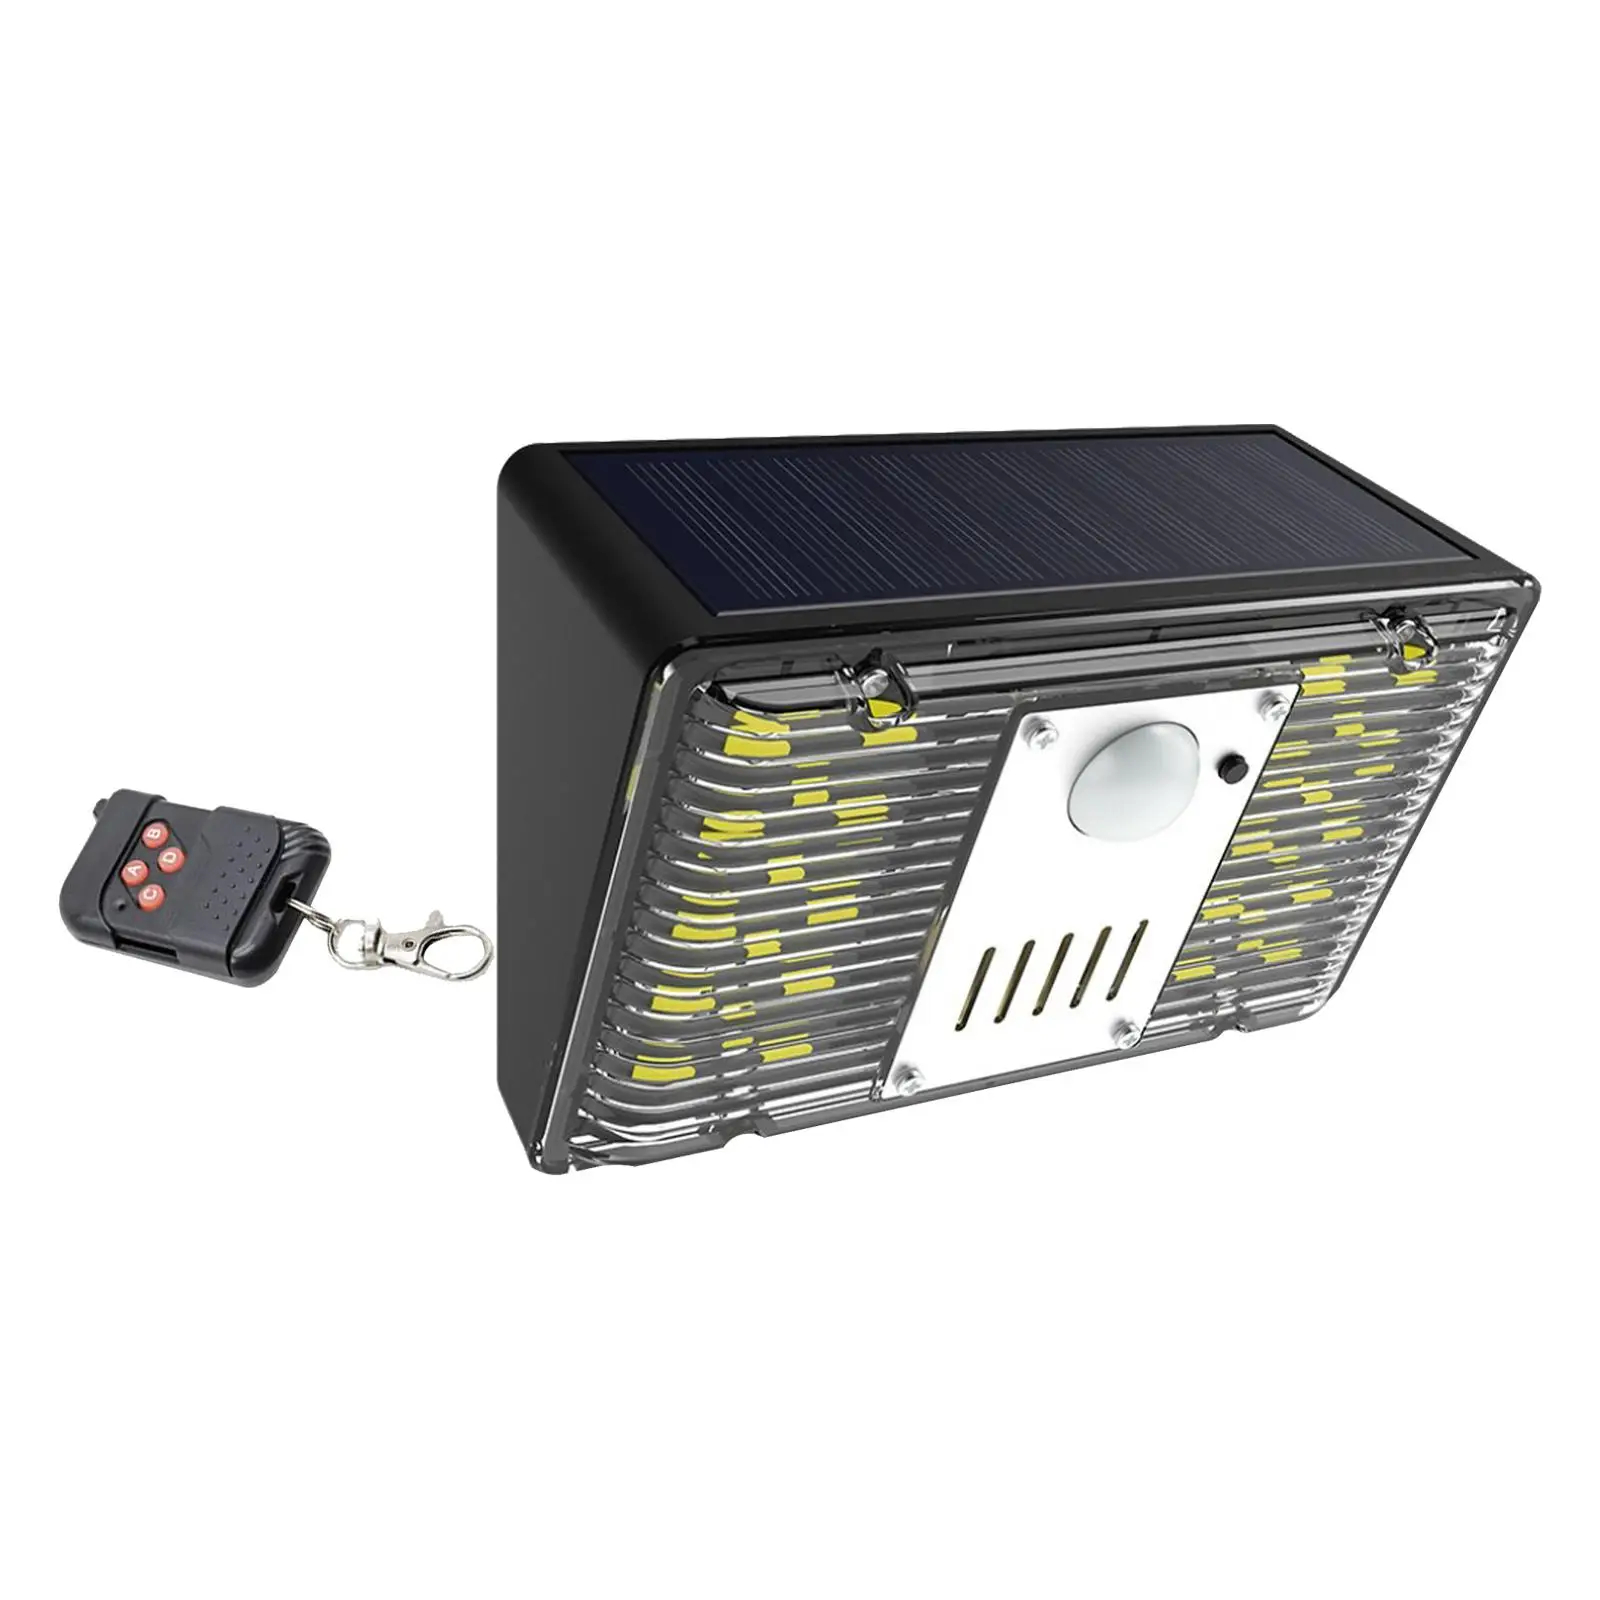 Courtyard wall lights 129dB Loud Alarm Courtyard Lamp with Remote Solar Recharge Solar lamp Outdoor